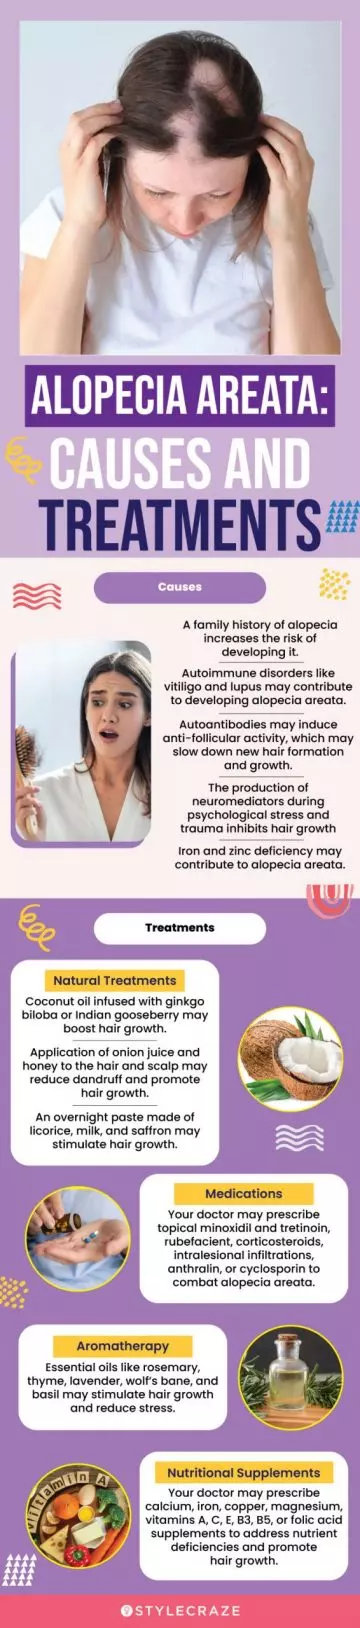 alopecia areata: causes and treatments (infographic)